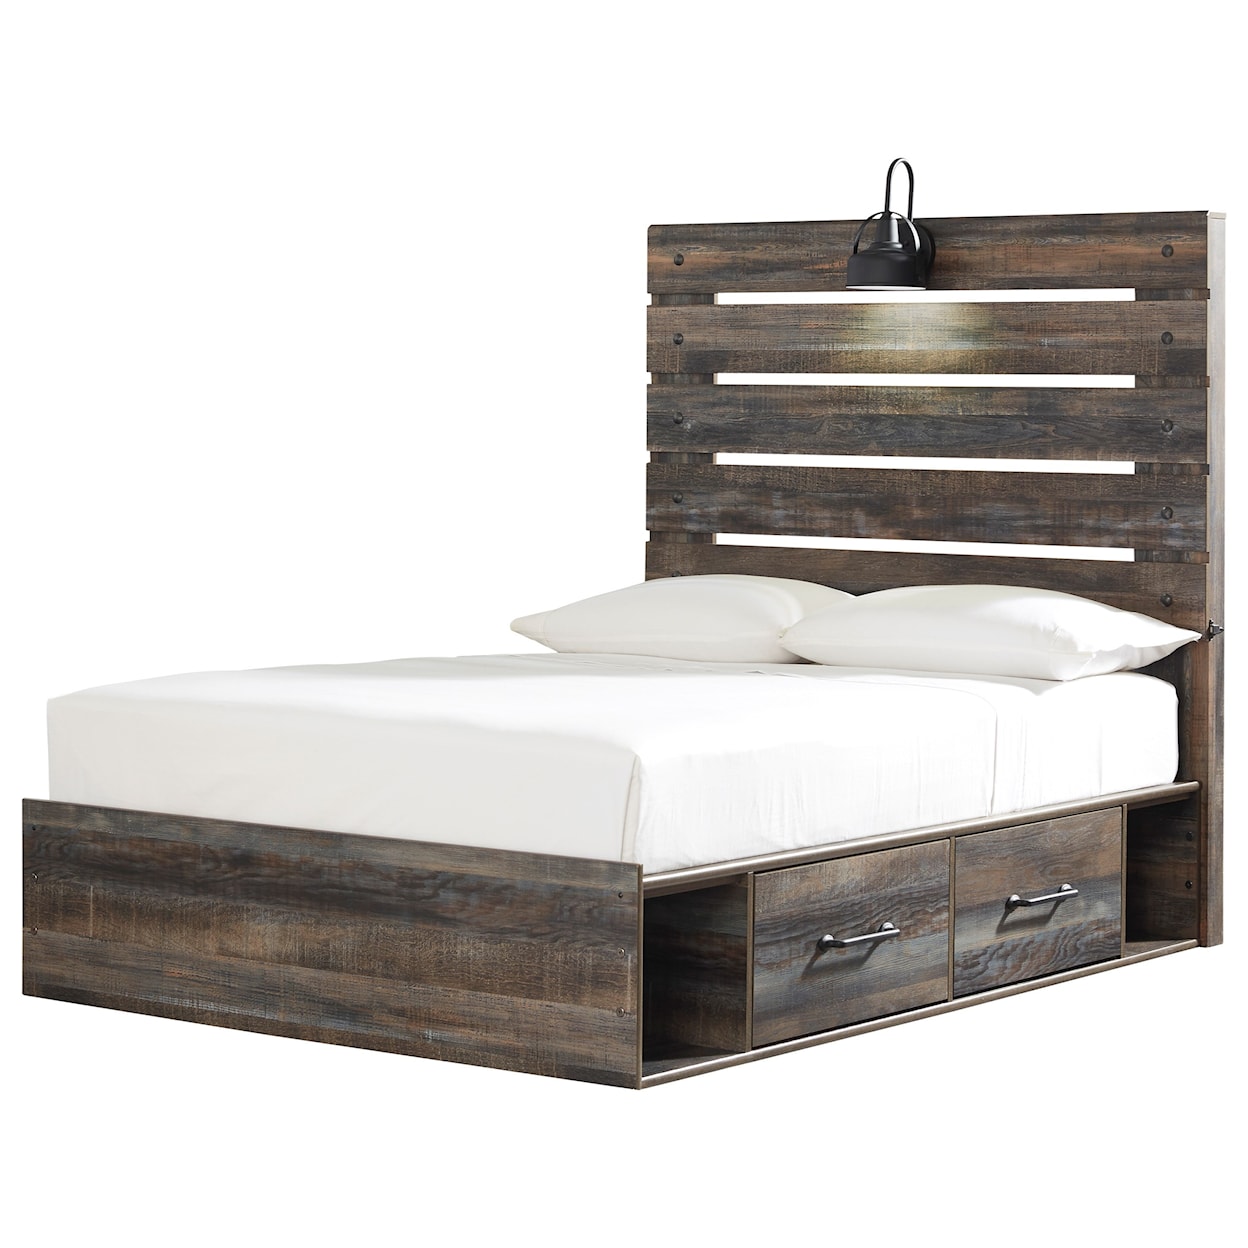 Ashley Furniture Signature Design Drystan Full Storage Bed with 2 Drawers